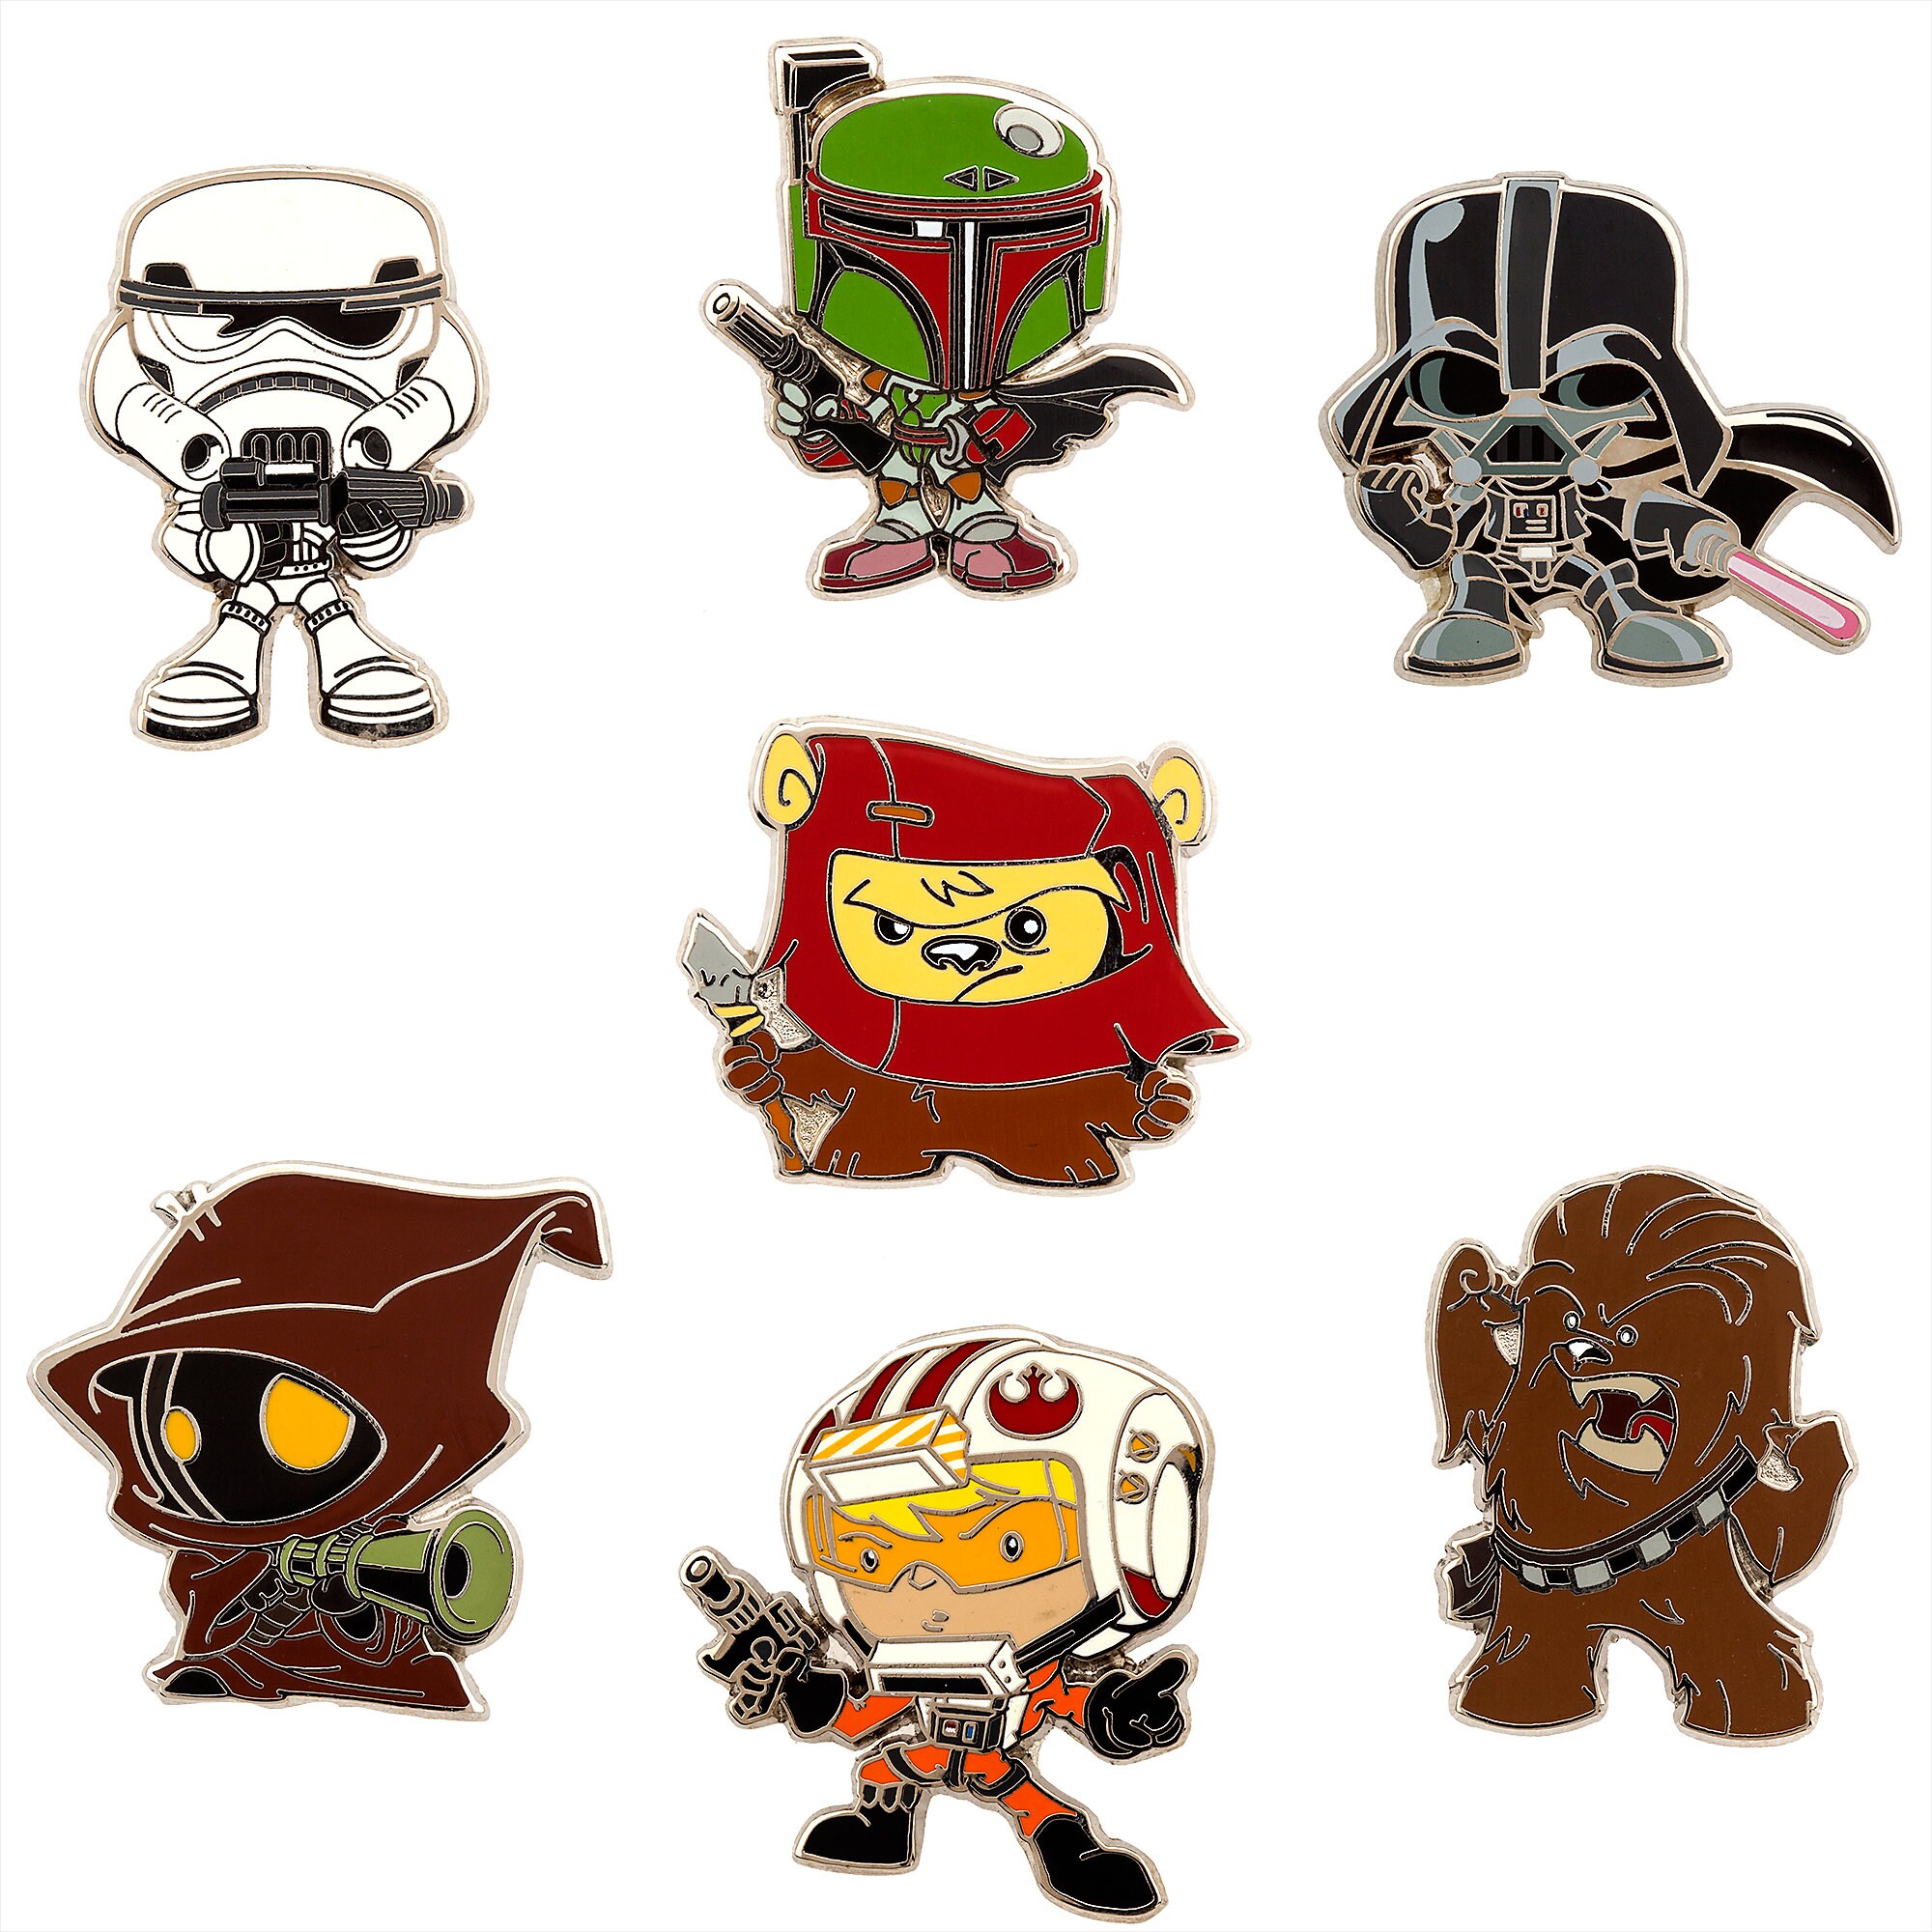 Star Wars Mystery Pin Pack